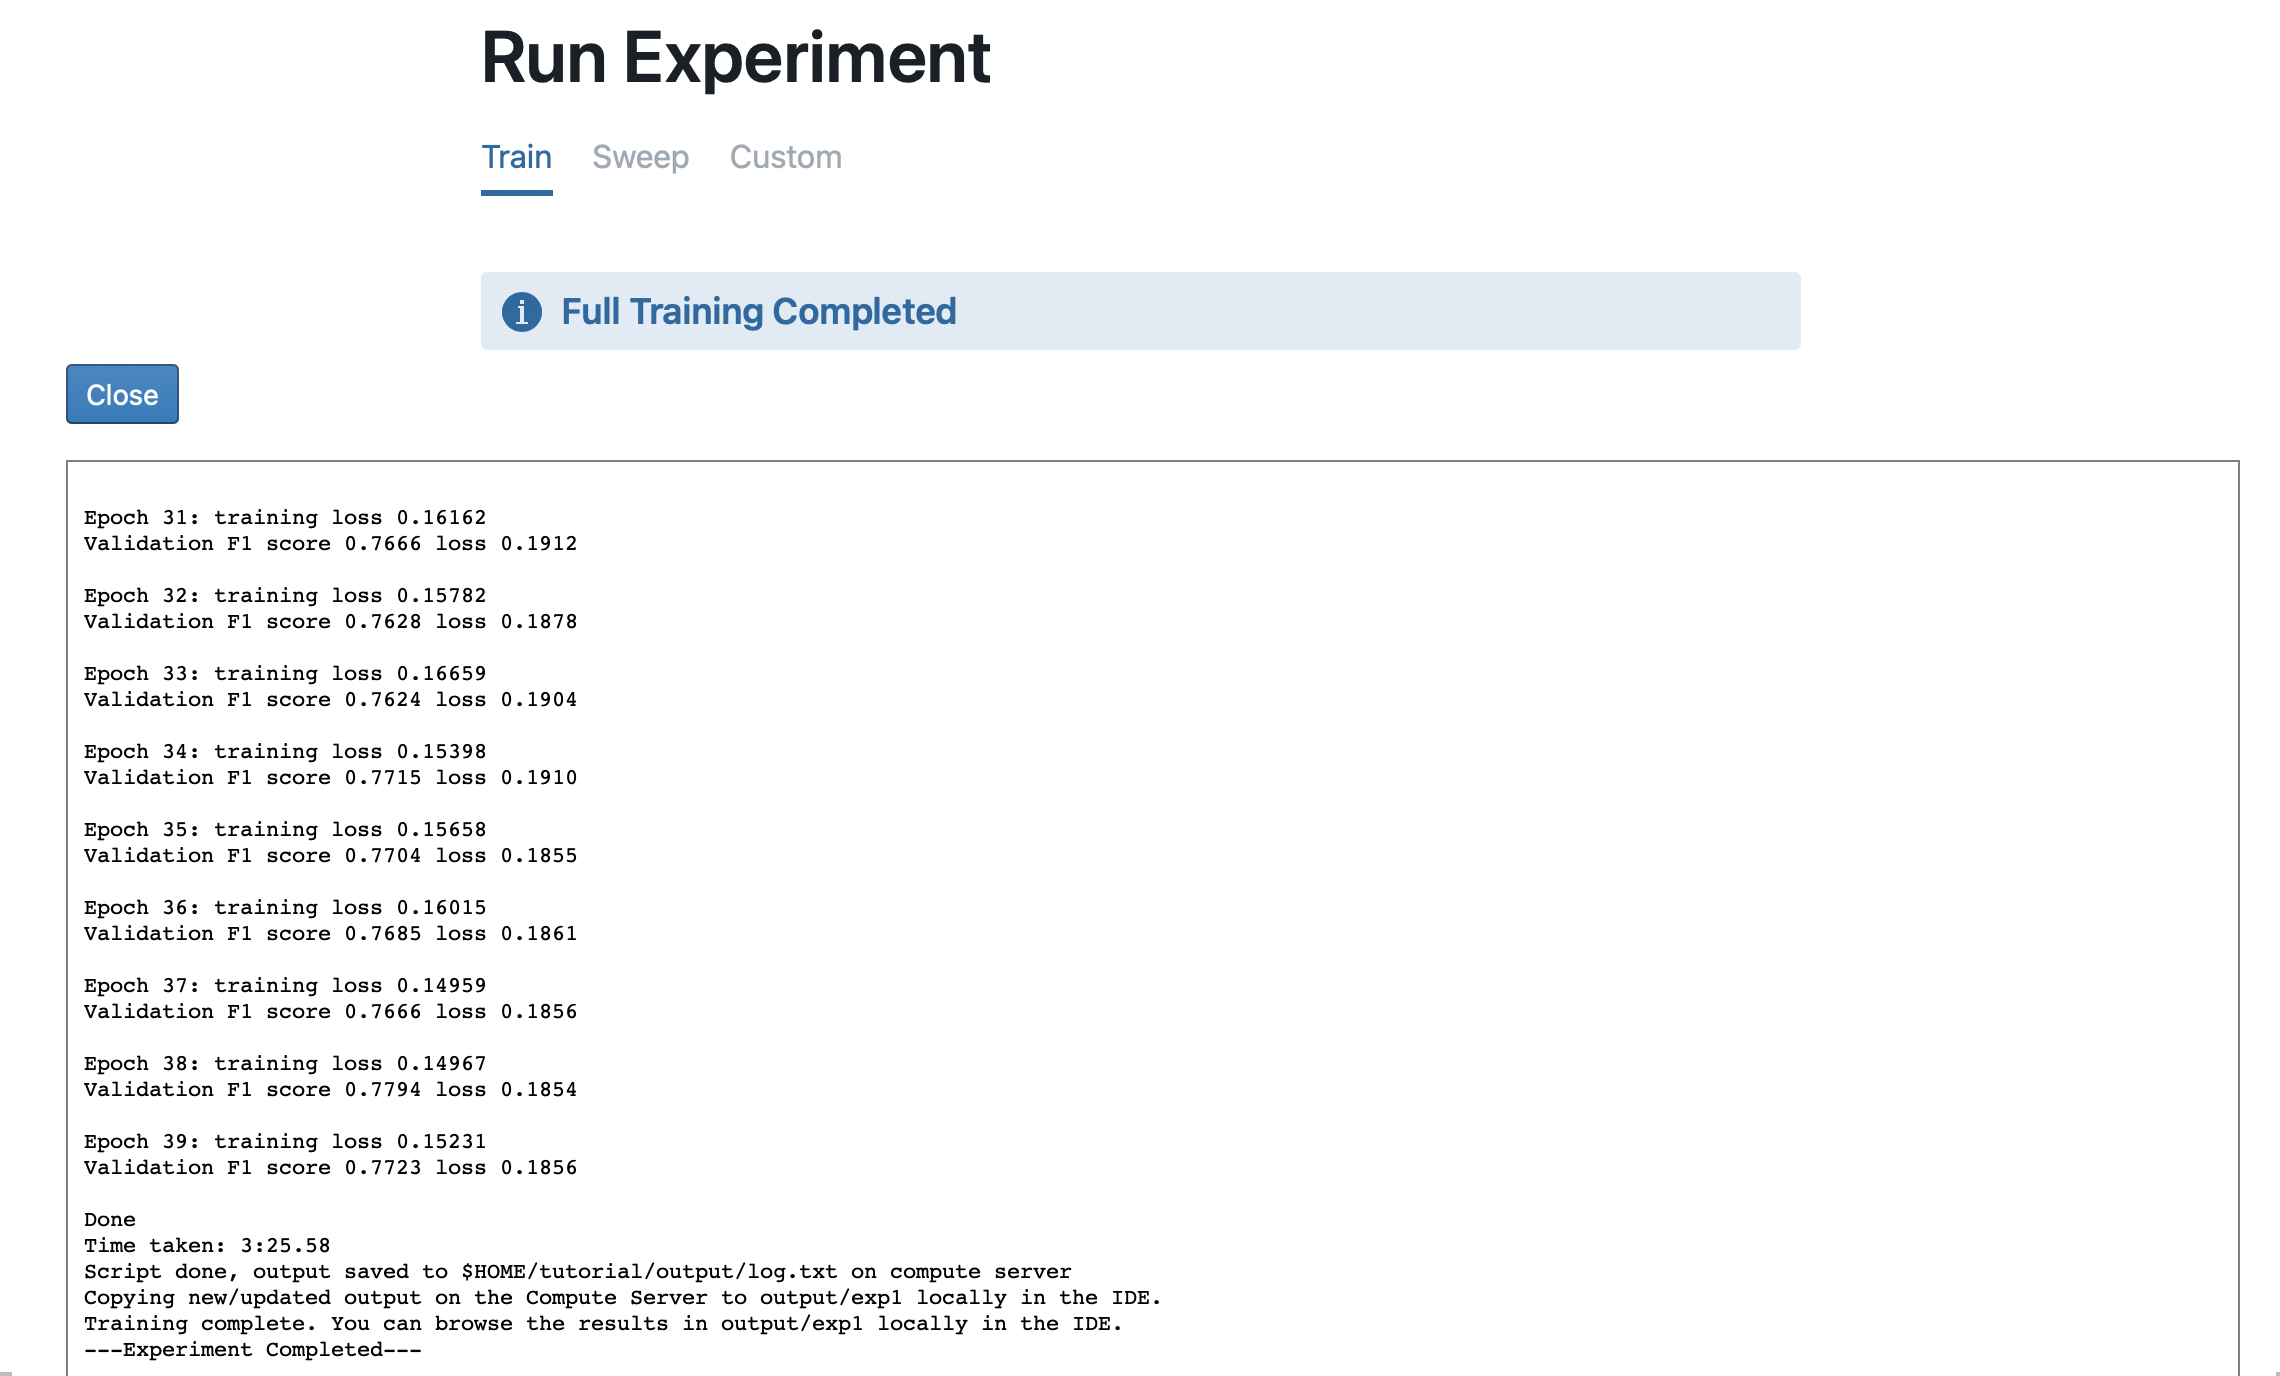 ../_images/run-experiment-completed.png